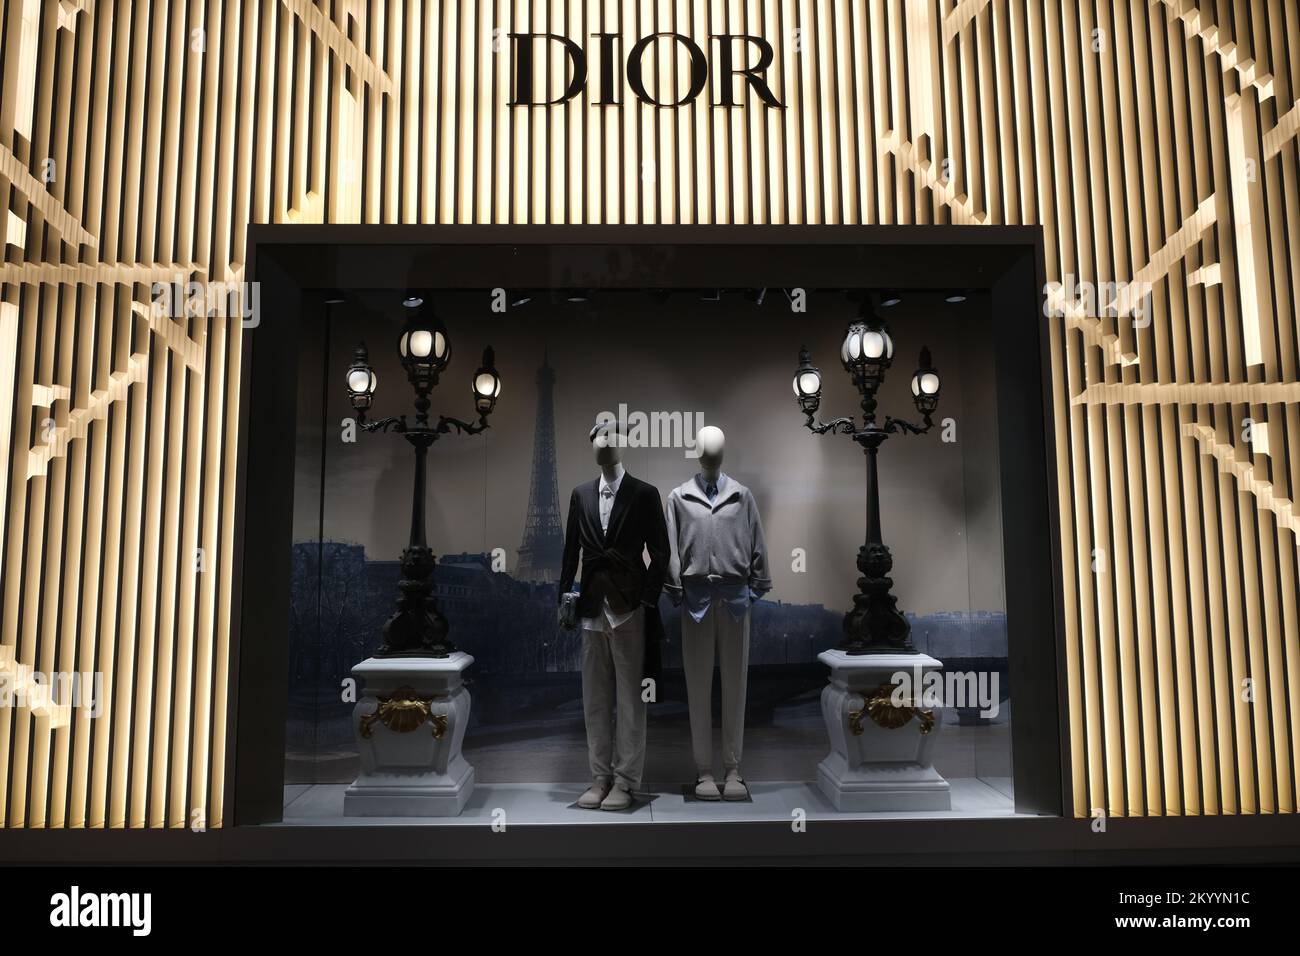 Shanghai,China-September 11th 2022: facade of DIOR store window and brand sign. French luxury fashion company Stock Photo